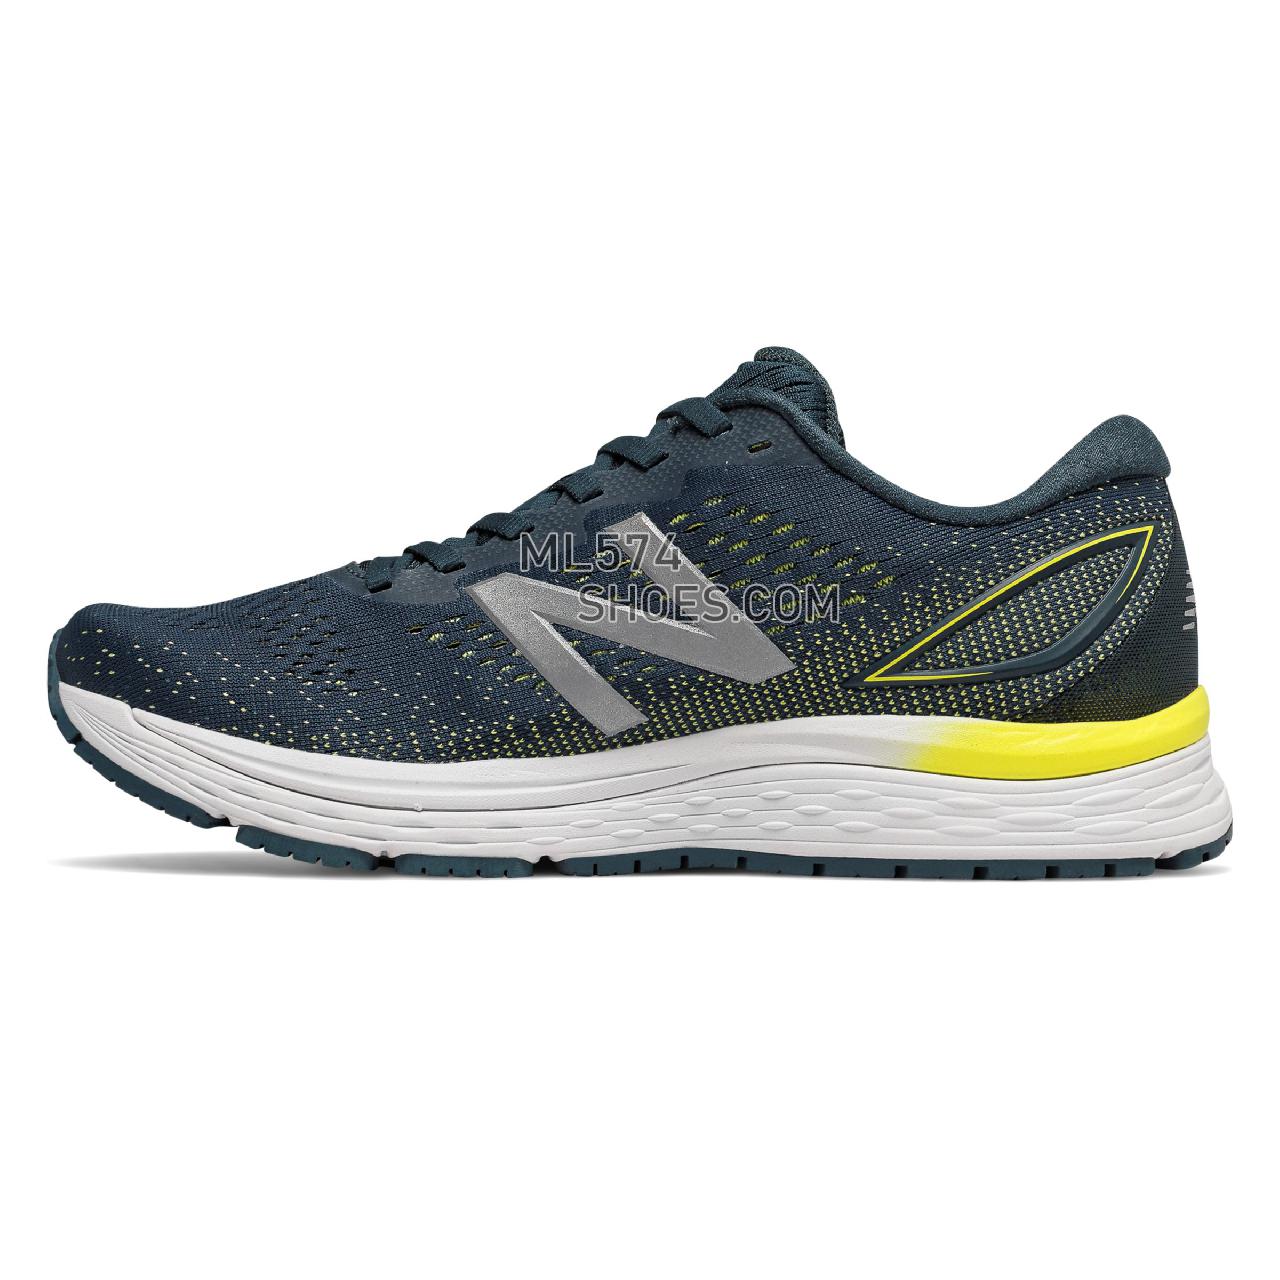 New Balance 880v9 - Men's Neutral Running - Supercell with Orion Blue and Sulphur Yellow - M880CH9